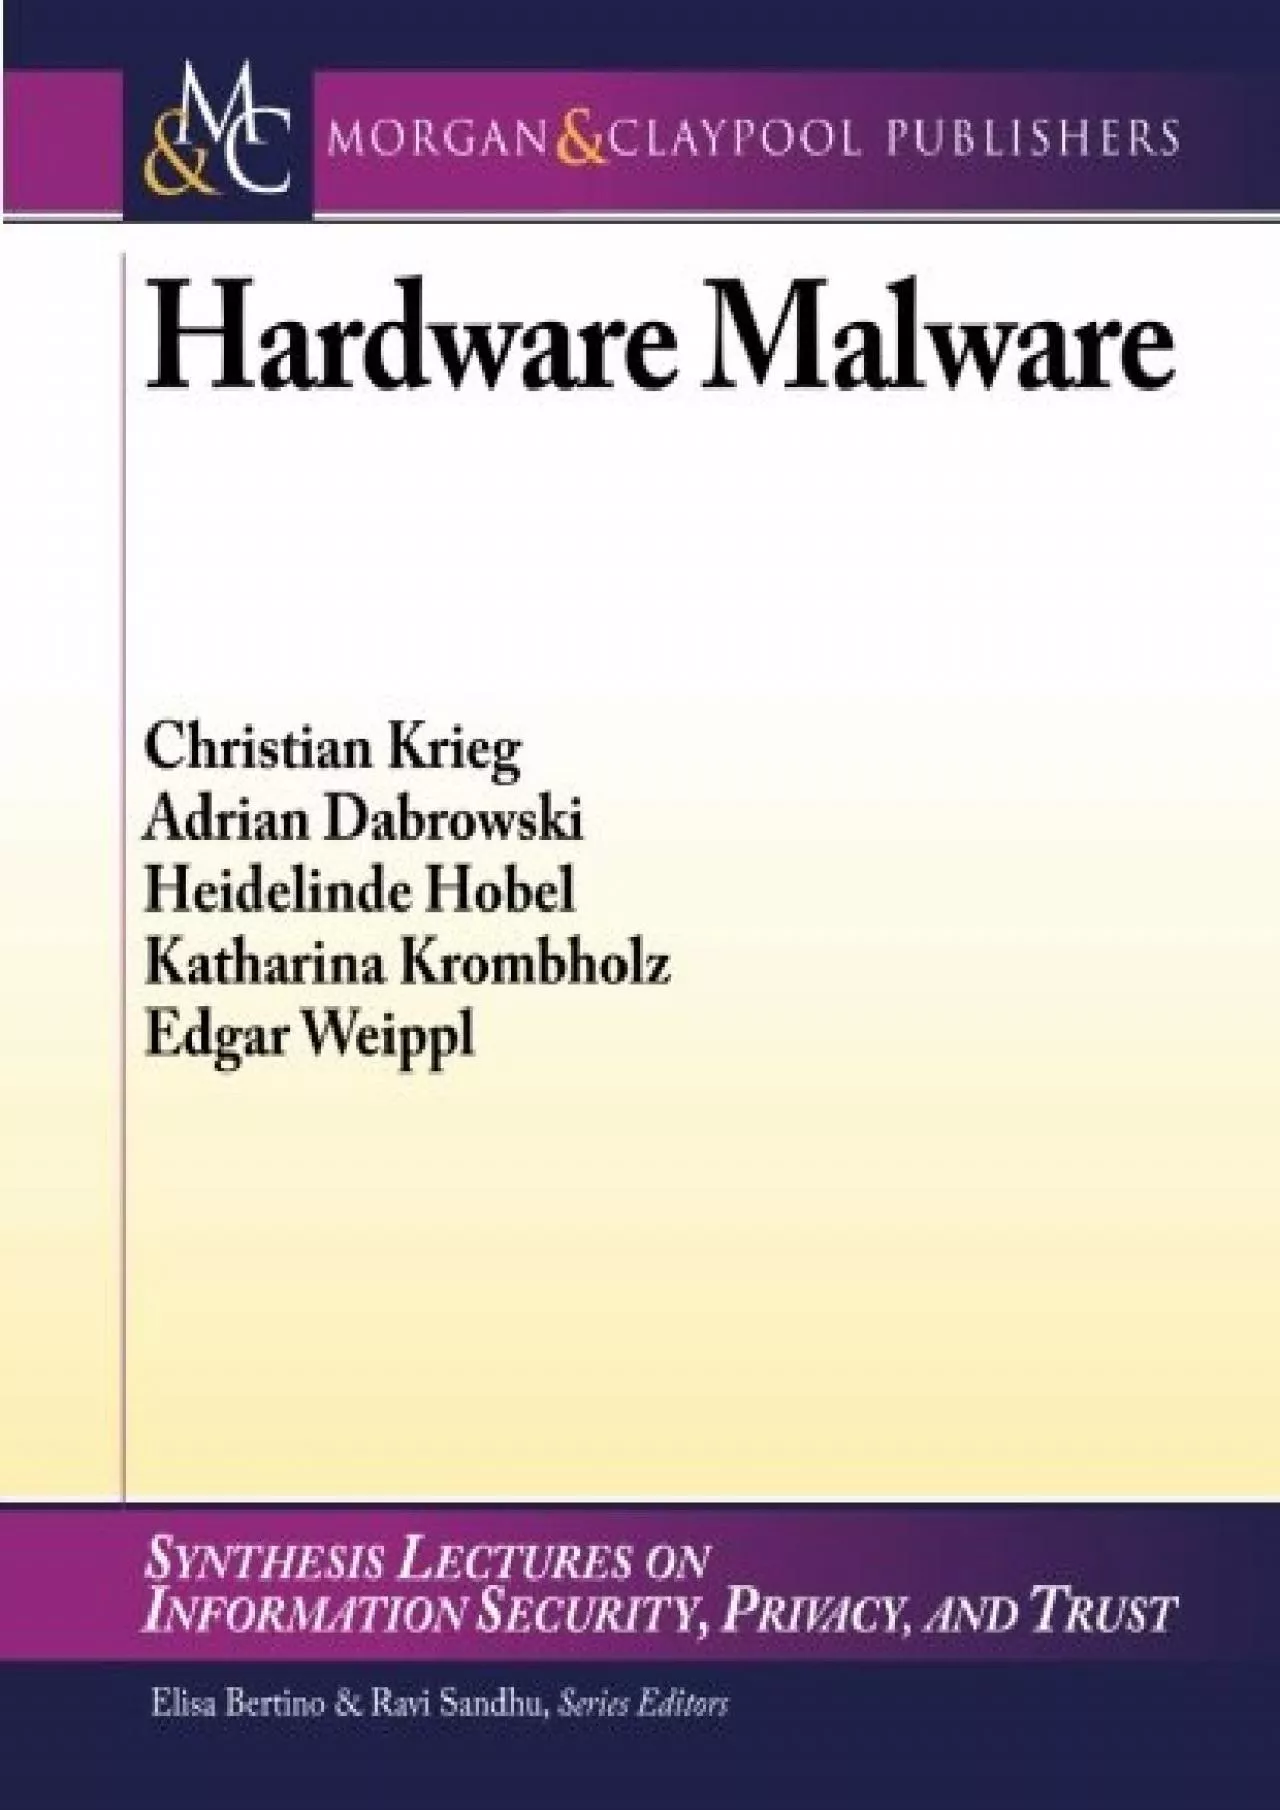 (BOOK)-Hardware Malware (Synthesis Lectures on Information Security, Privacy,  Trust,